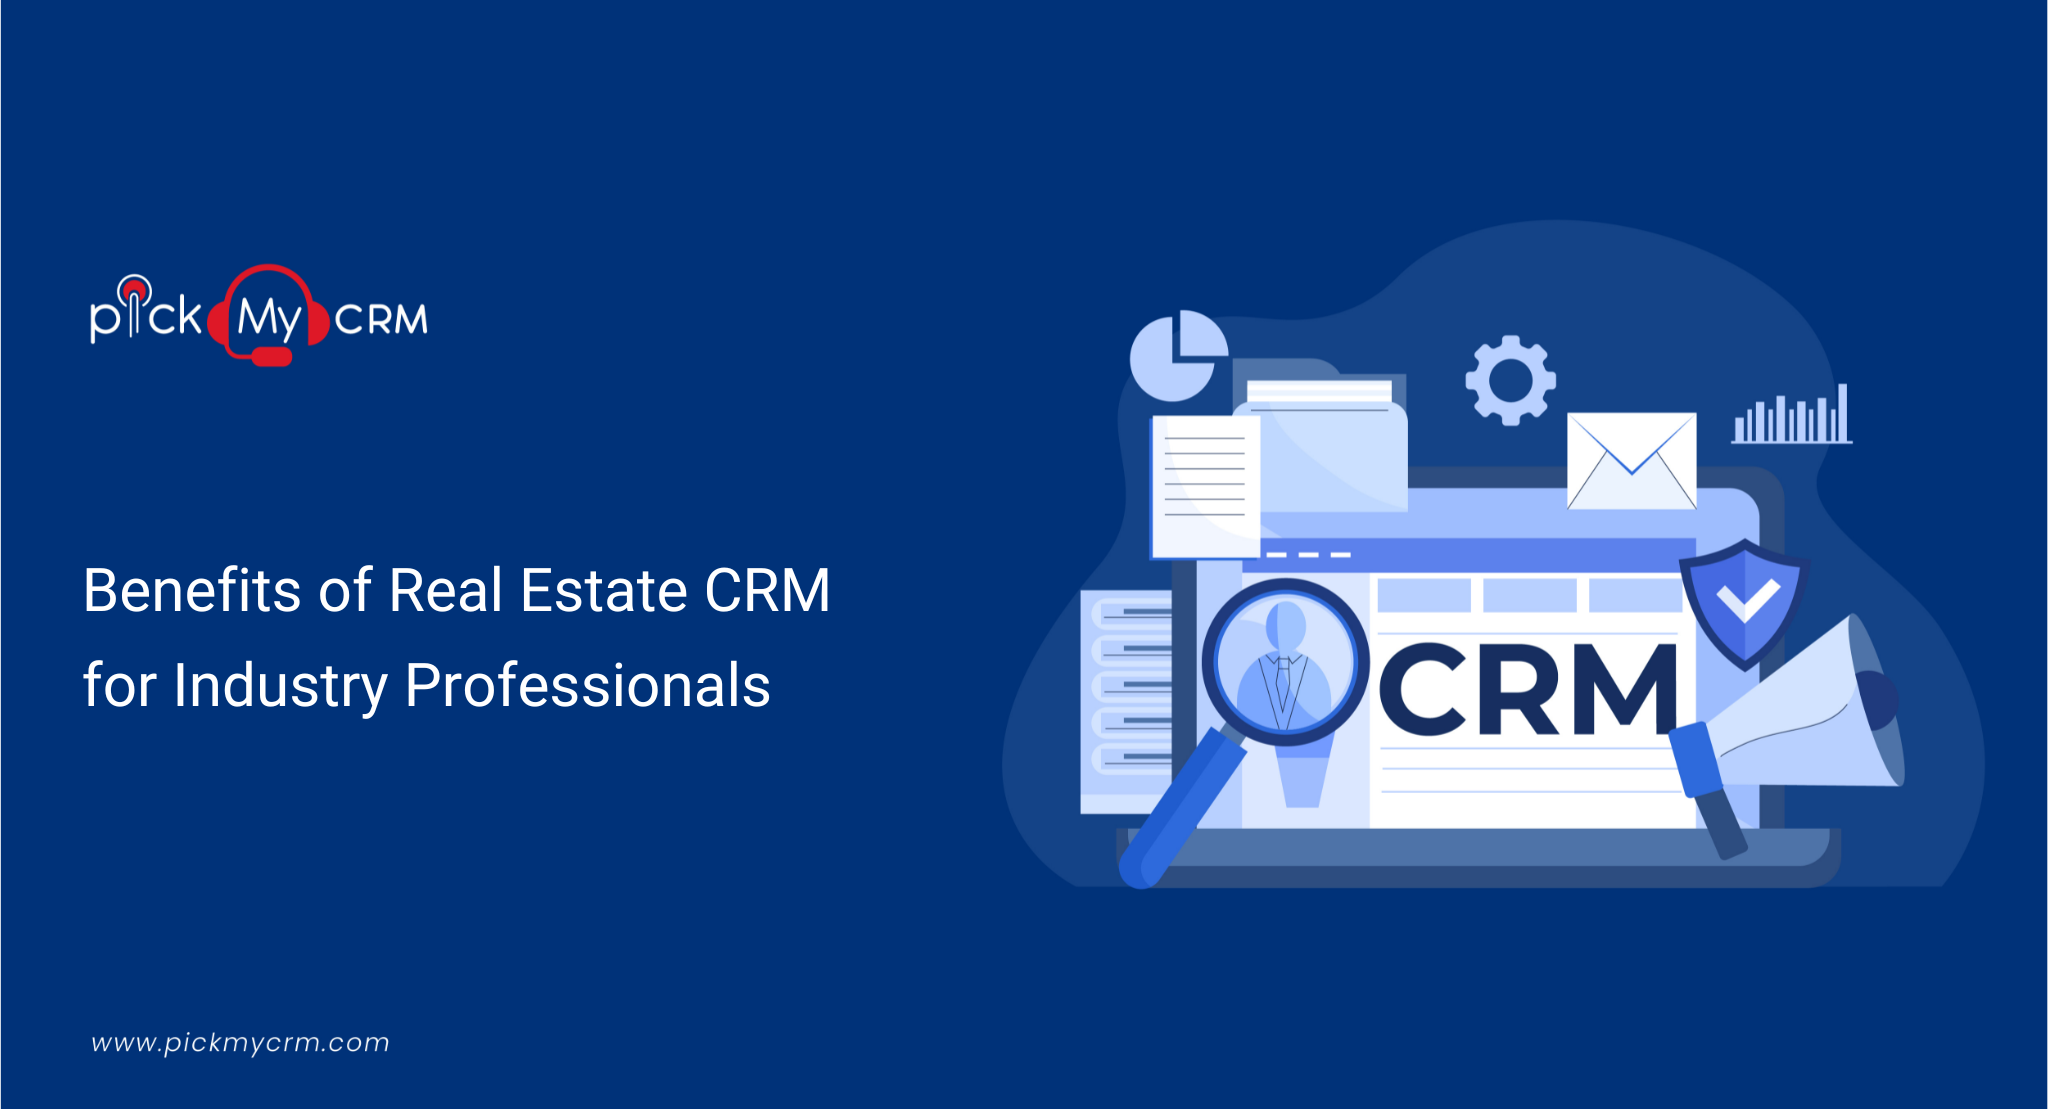 Benefits of Real Estate CRM for Industry Professionals